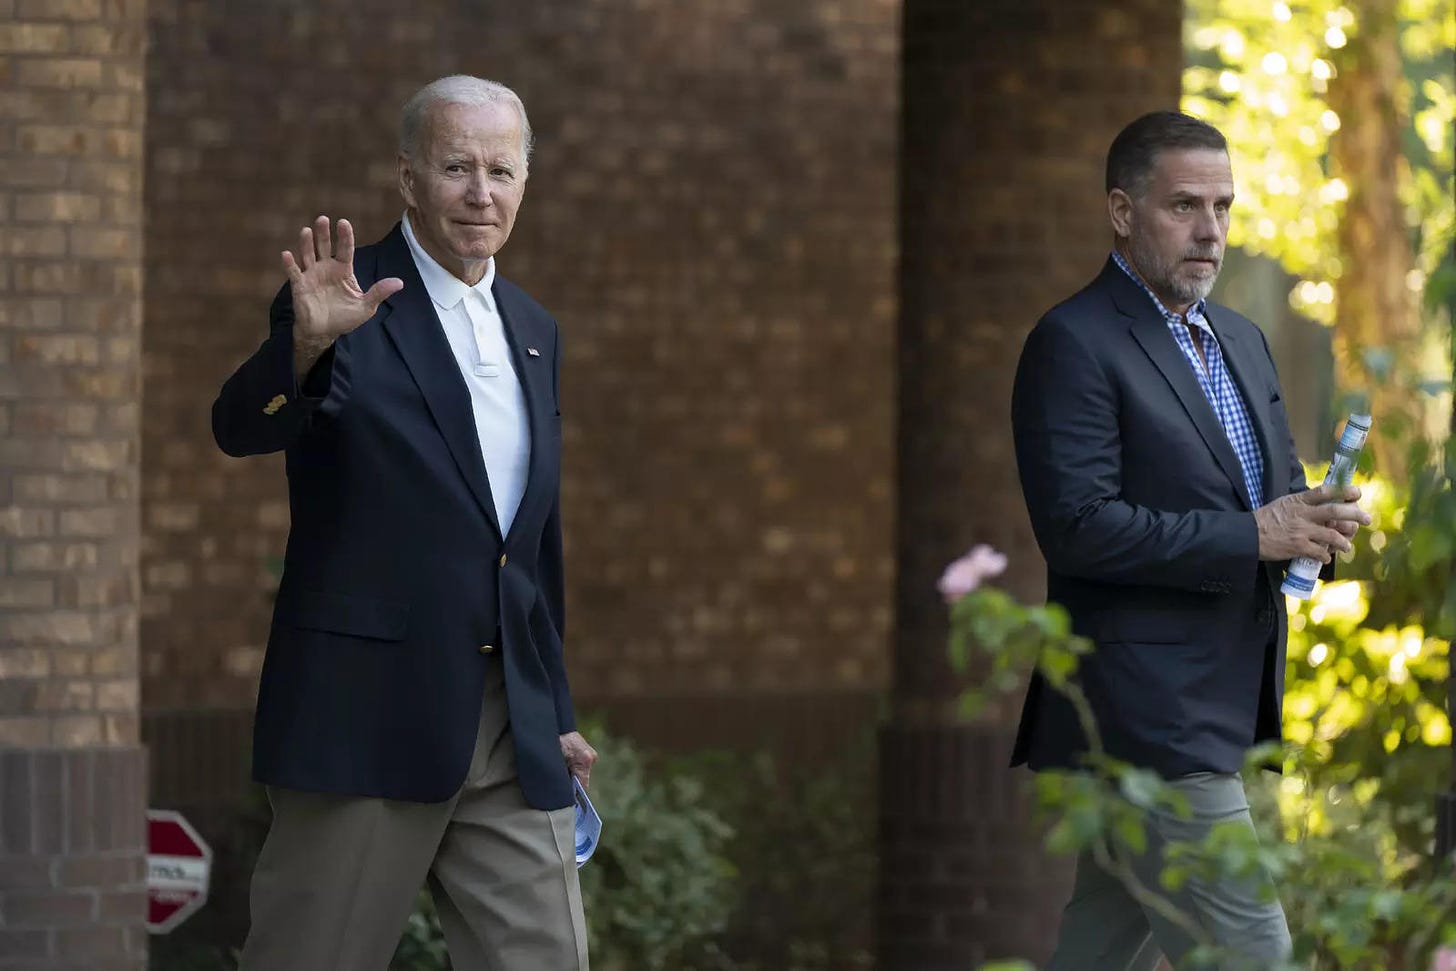 Biden and the smartest man he knows